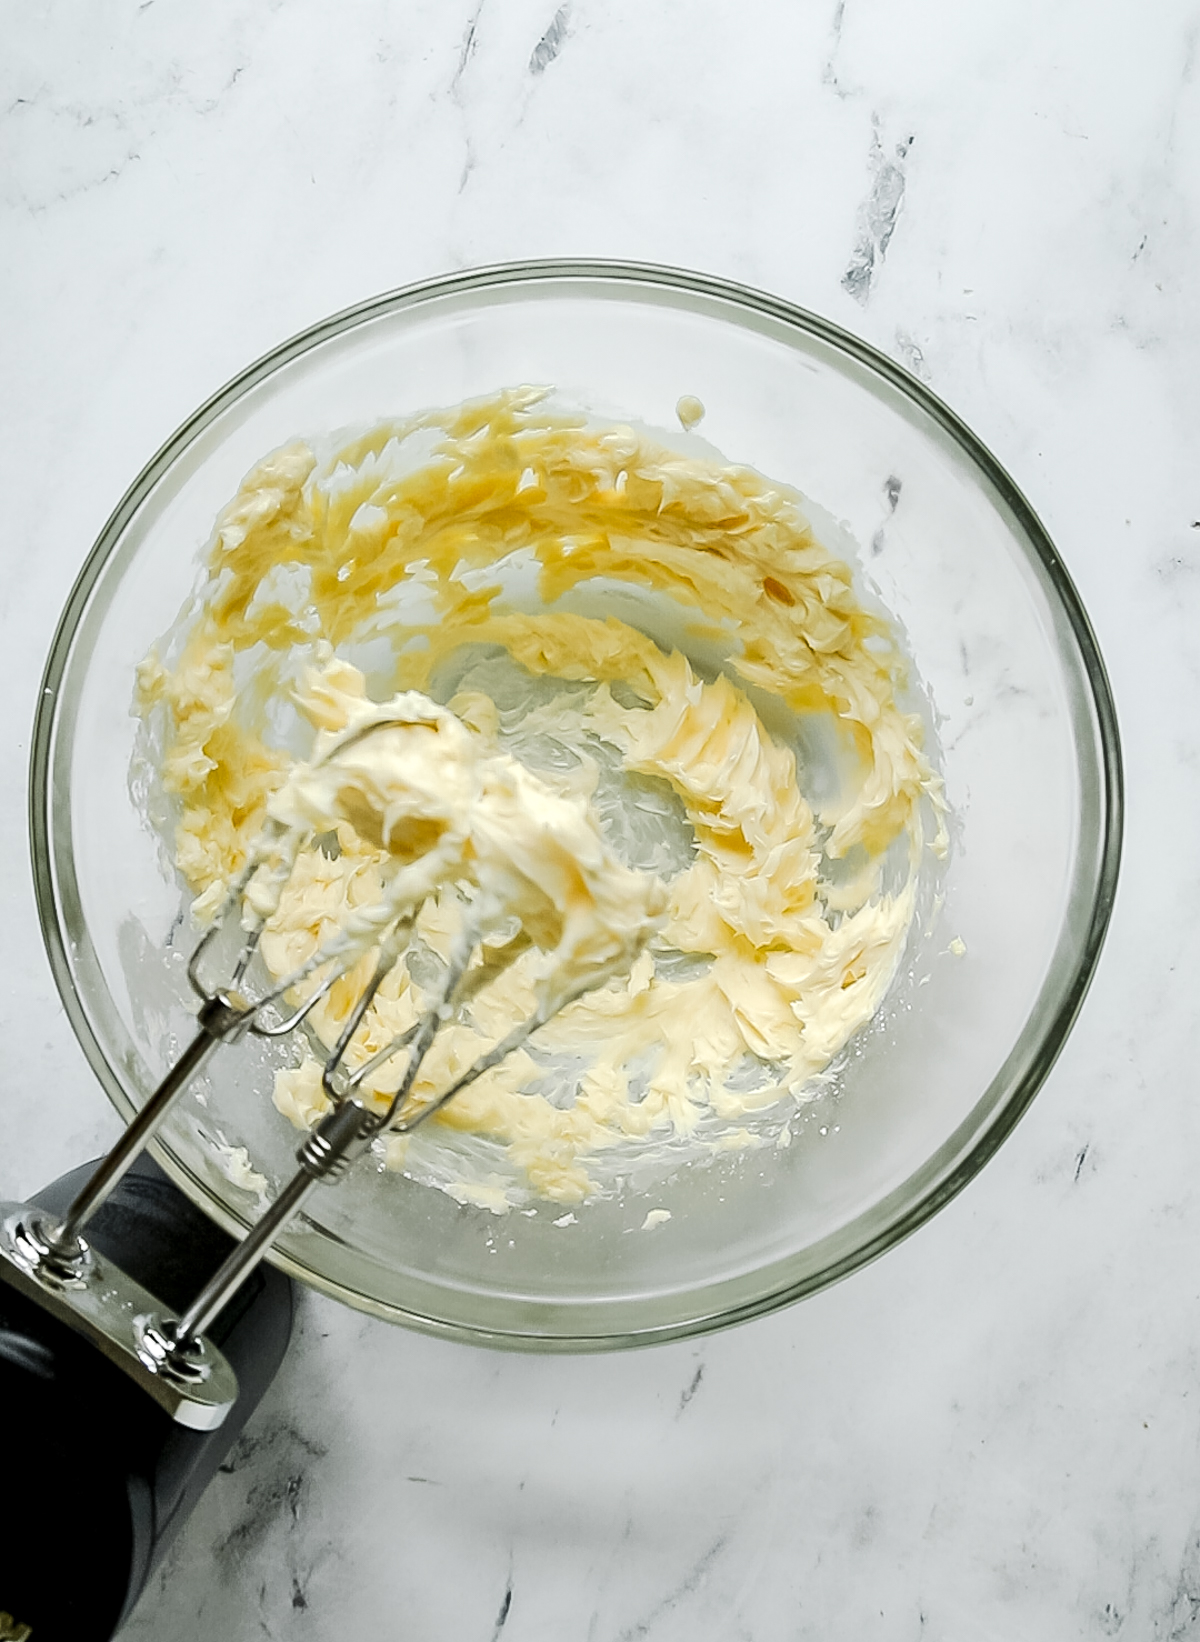 butter, powdered sugar, and vanilla creamed together in bowl with a hand mixer